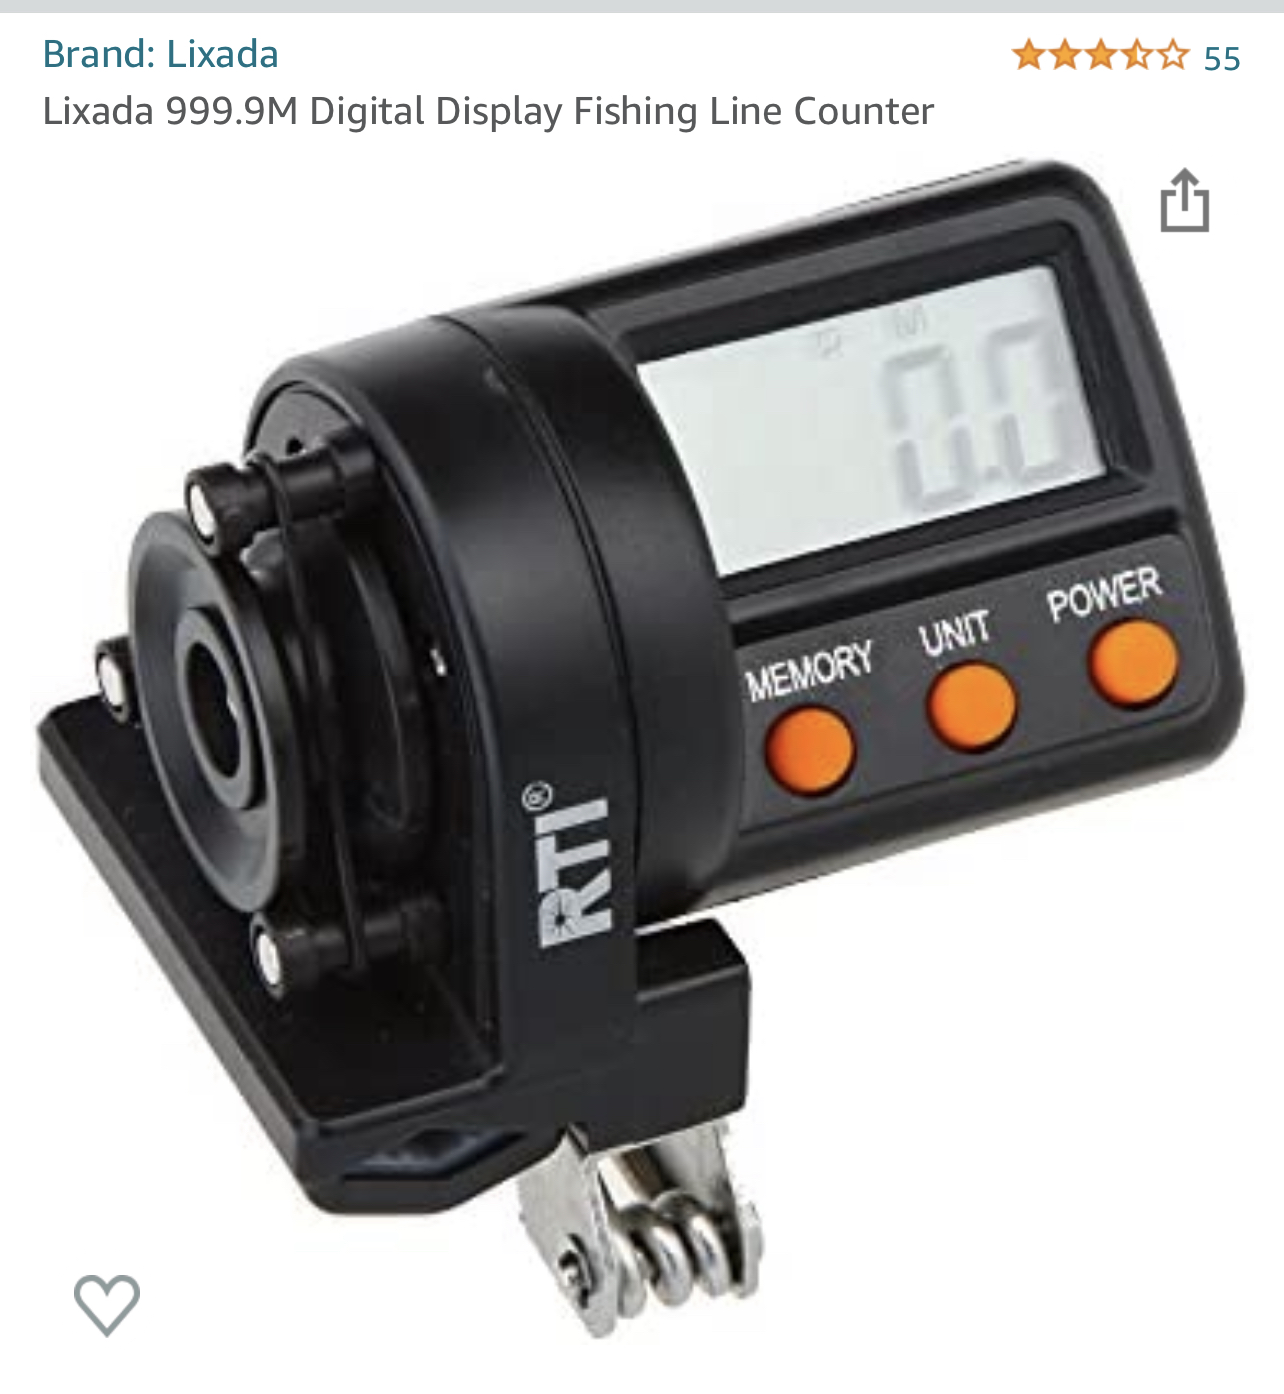 quality line counter? - Fishing Rods, Reels, Line, and Knots